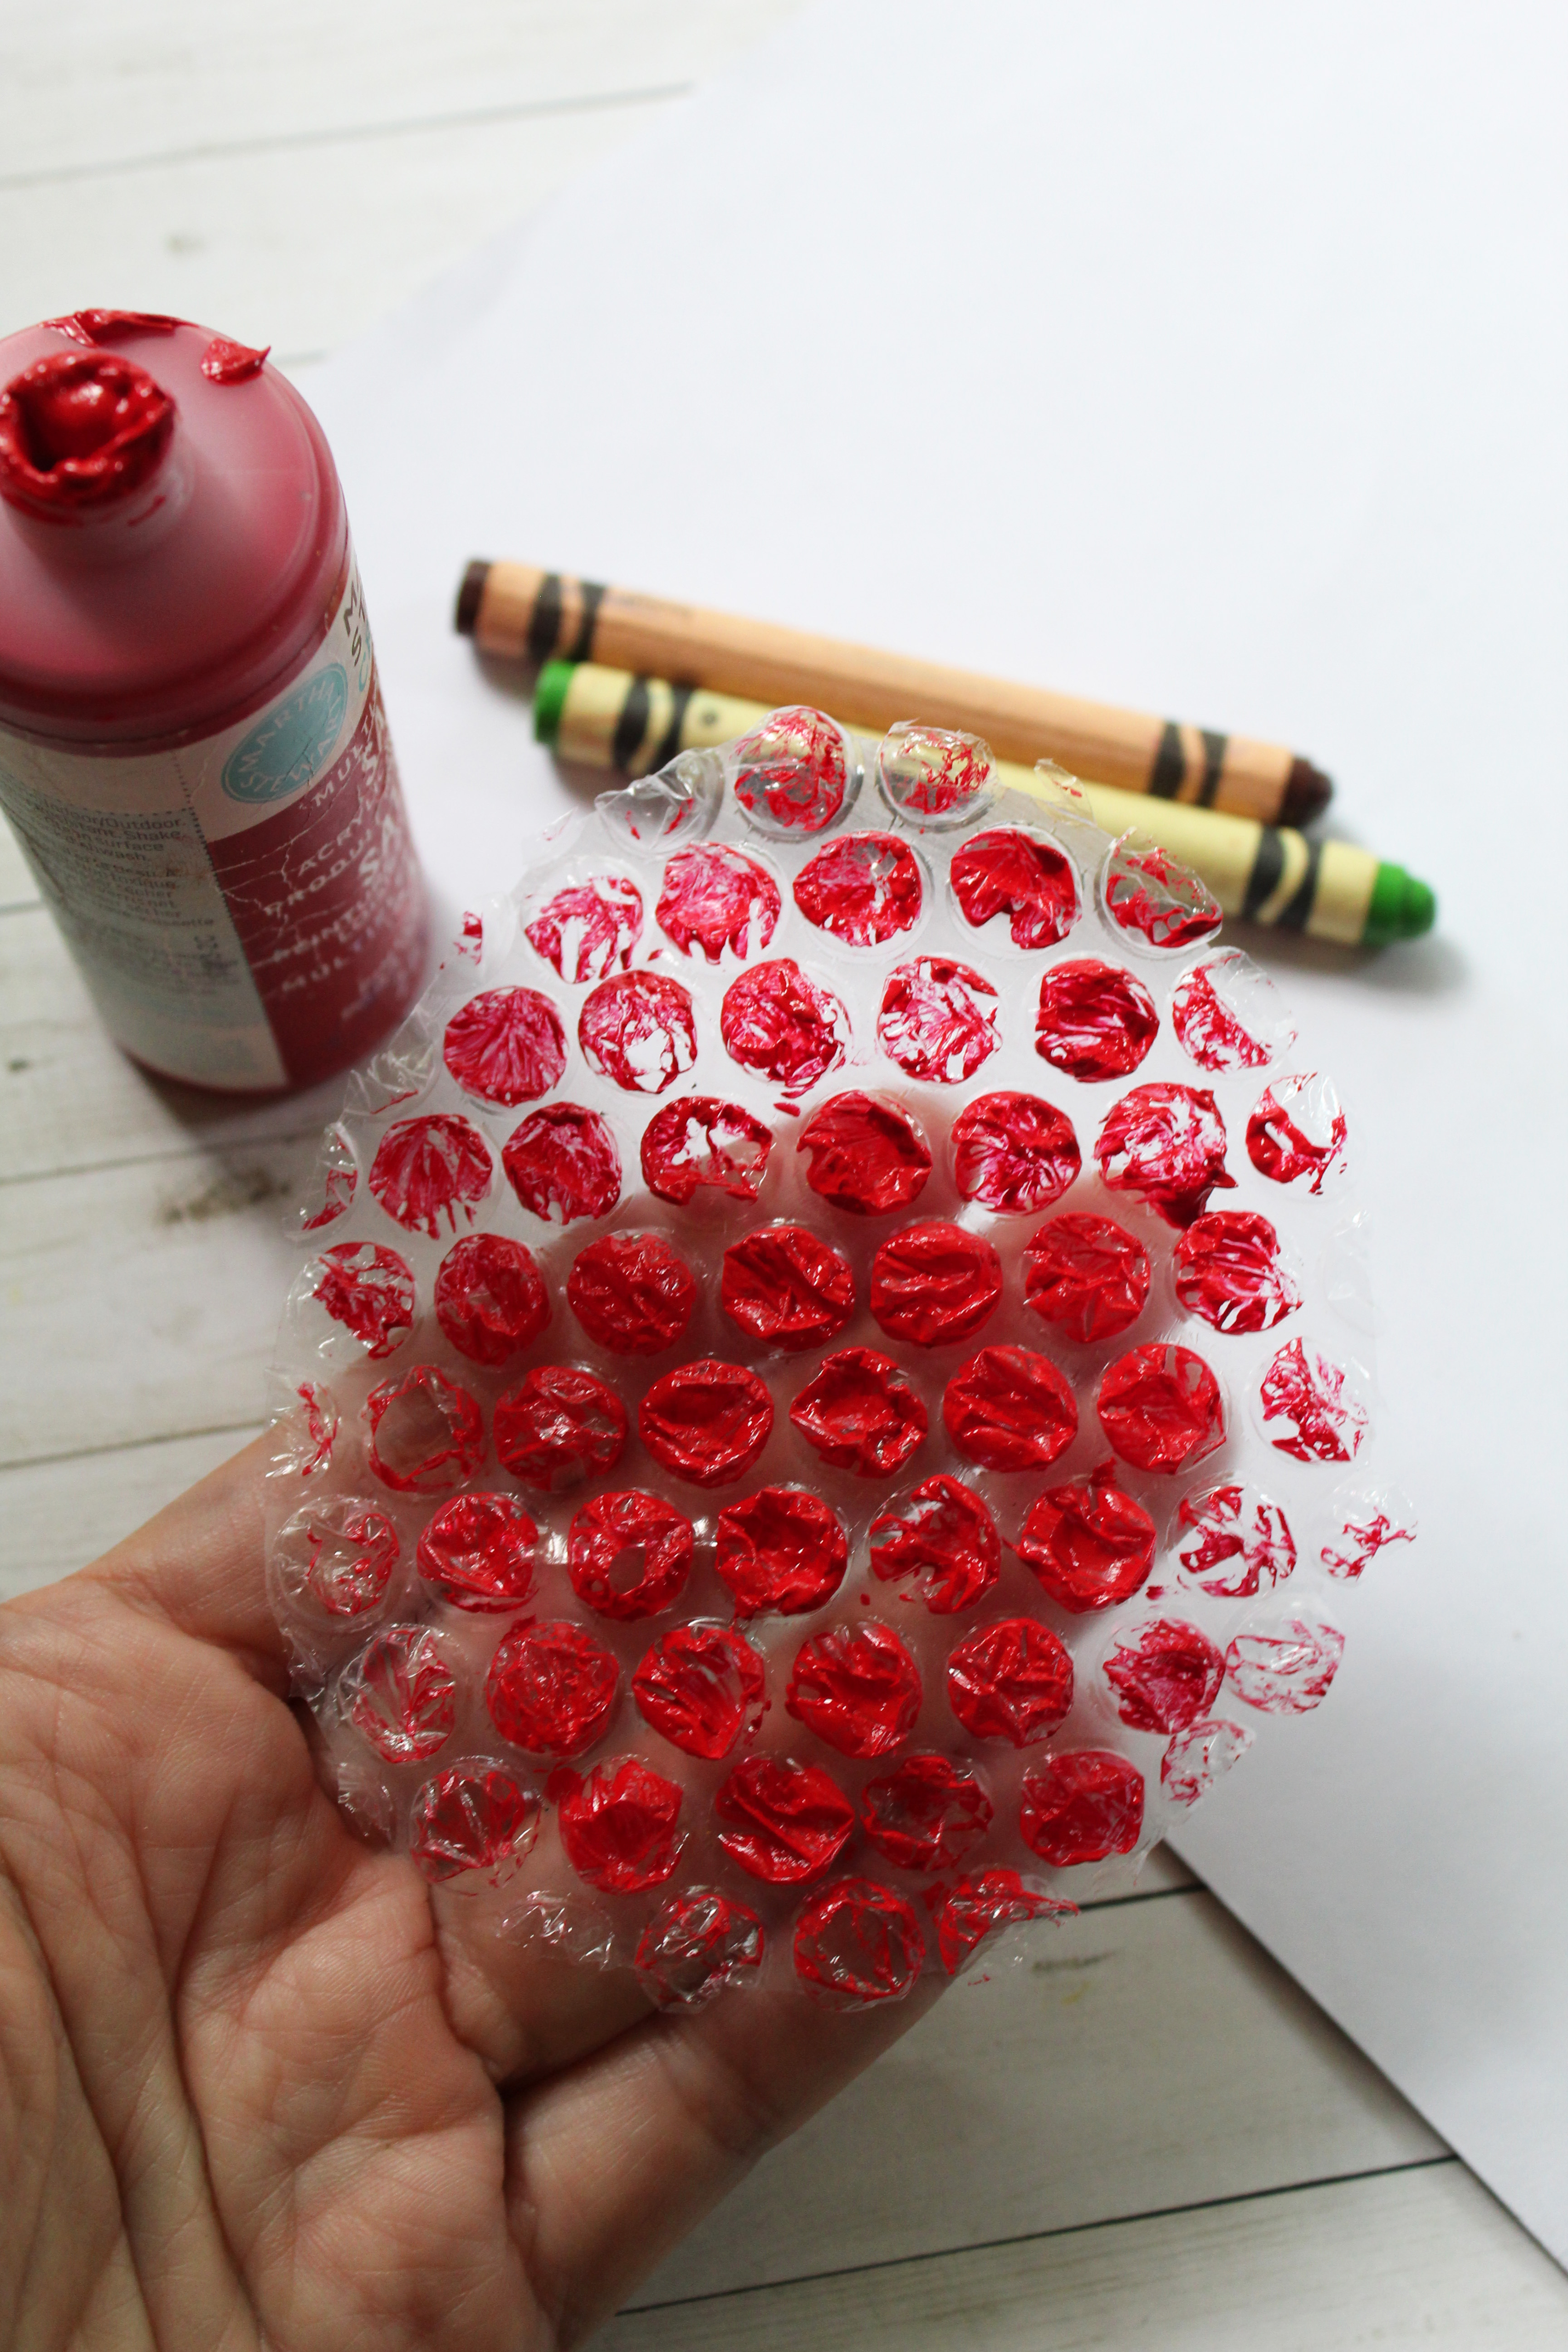 Apple Bubble Wrap stamp craft for kids. This is a great craft for children of all ages and the results are so fun!